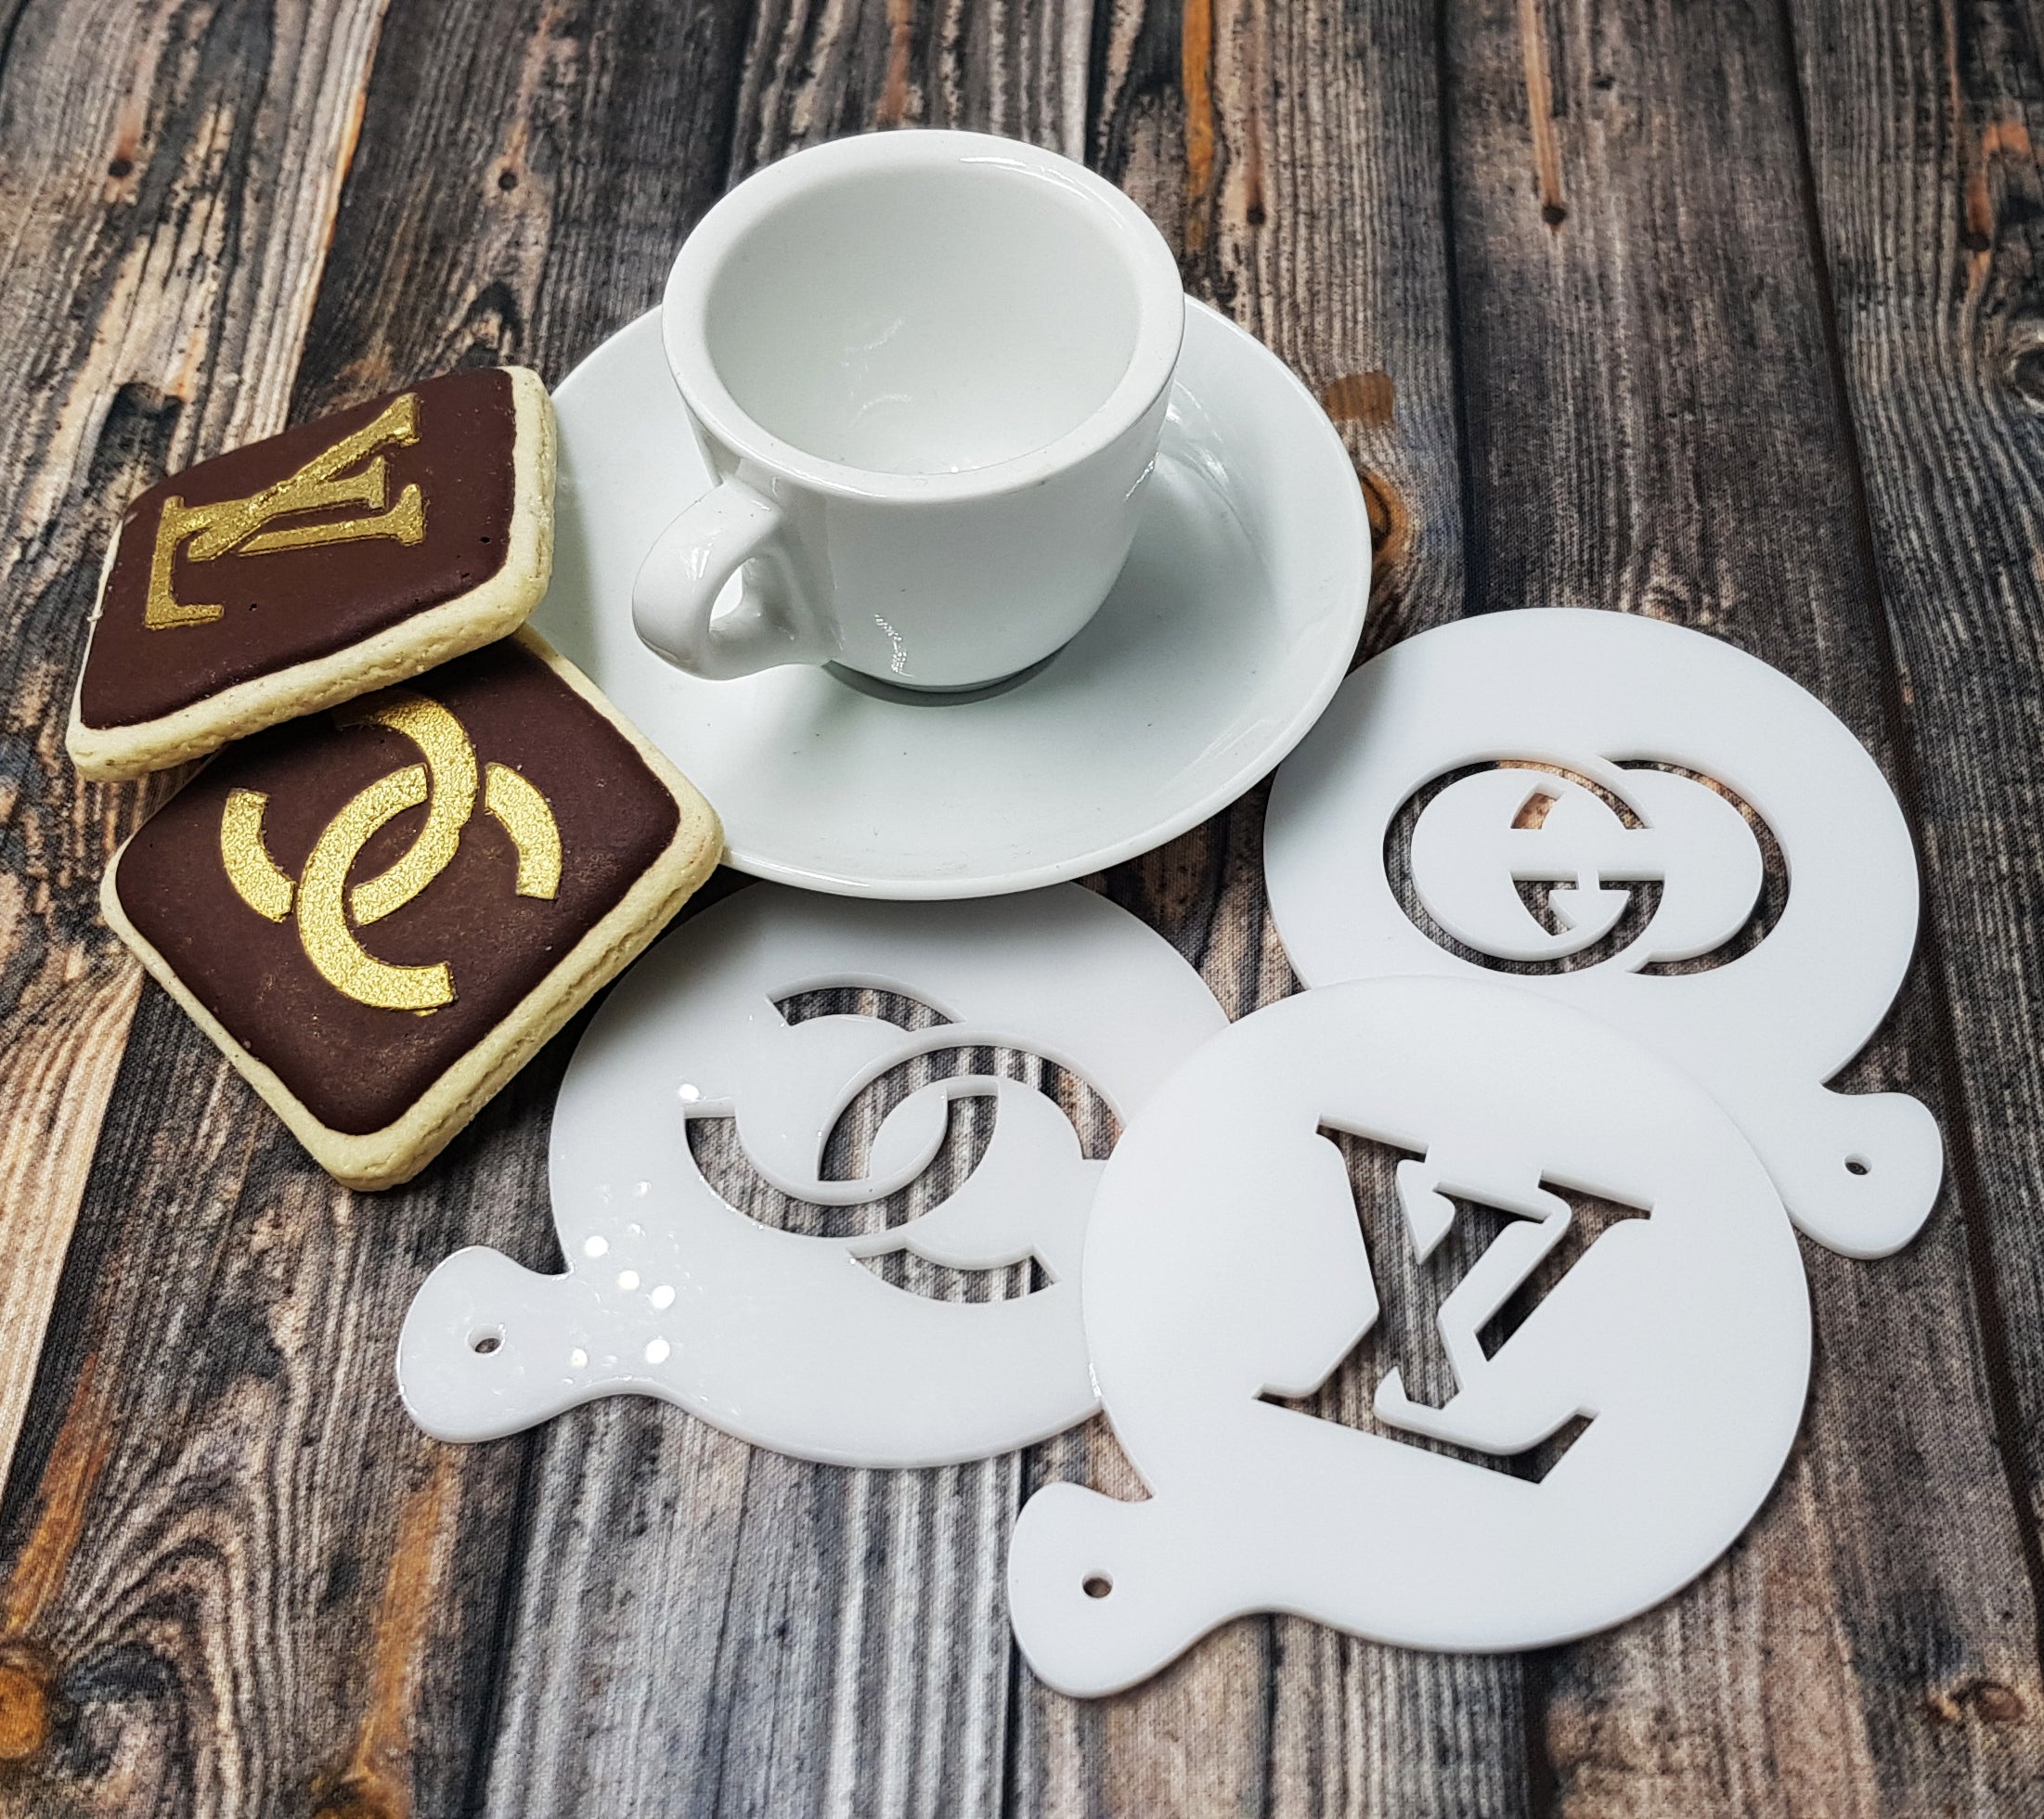 Coffee stencils custom made from your logo, text or design